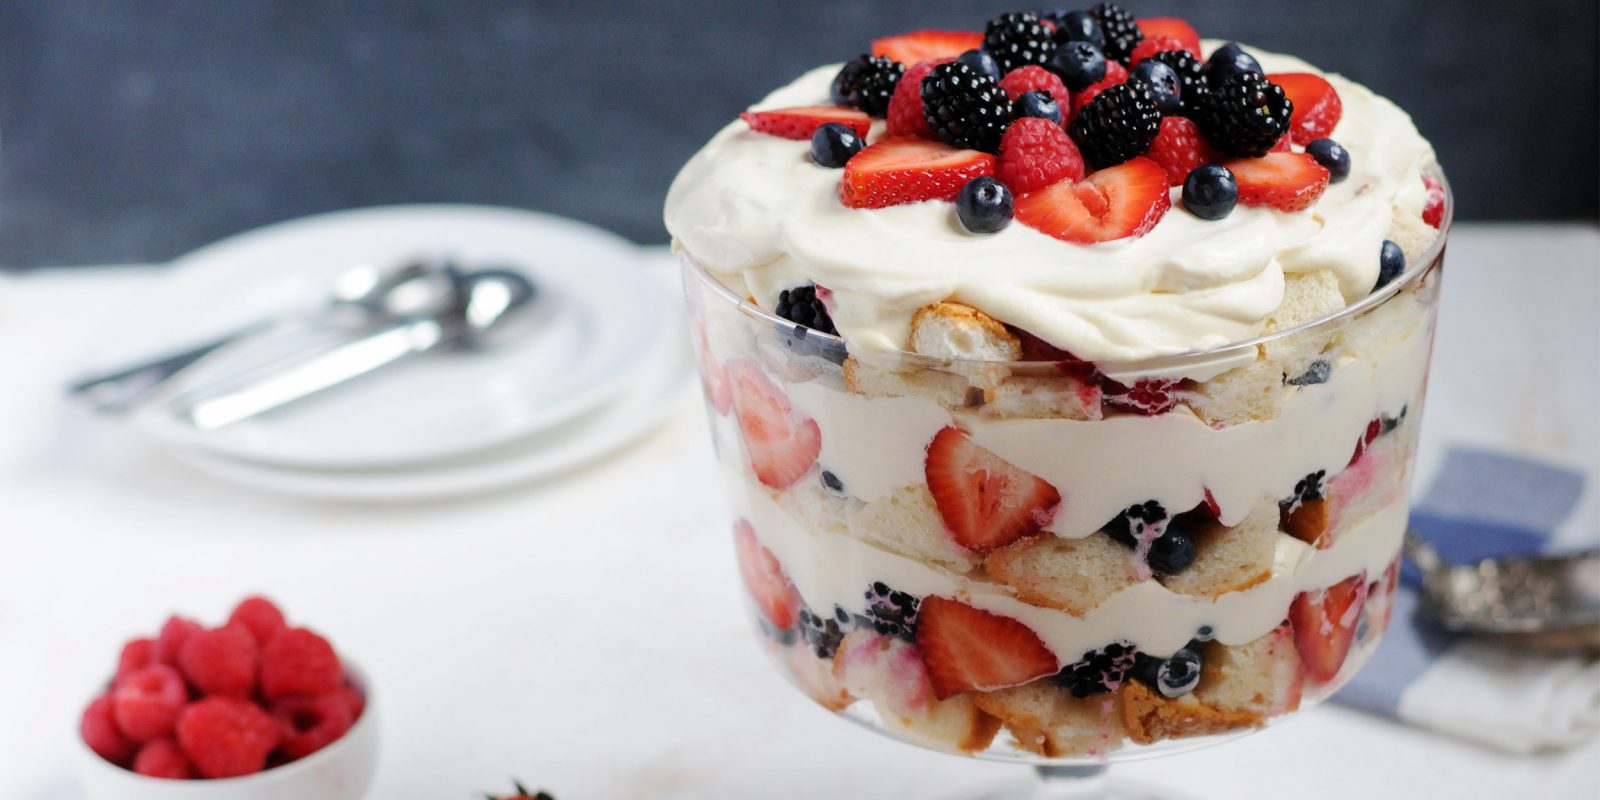 Andrew Zimmern's Berry Trifle